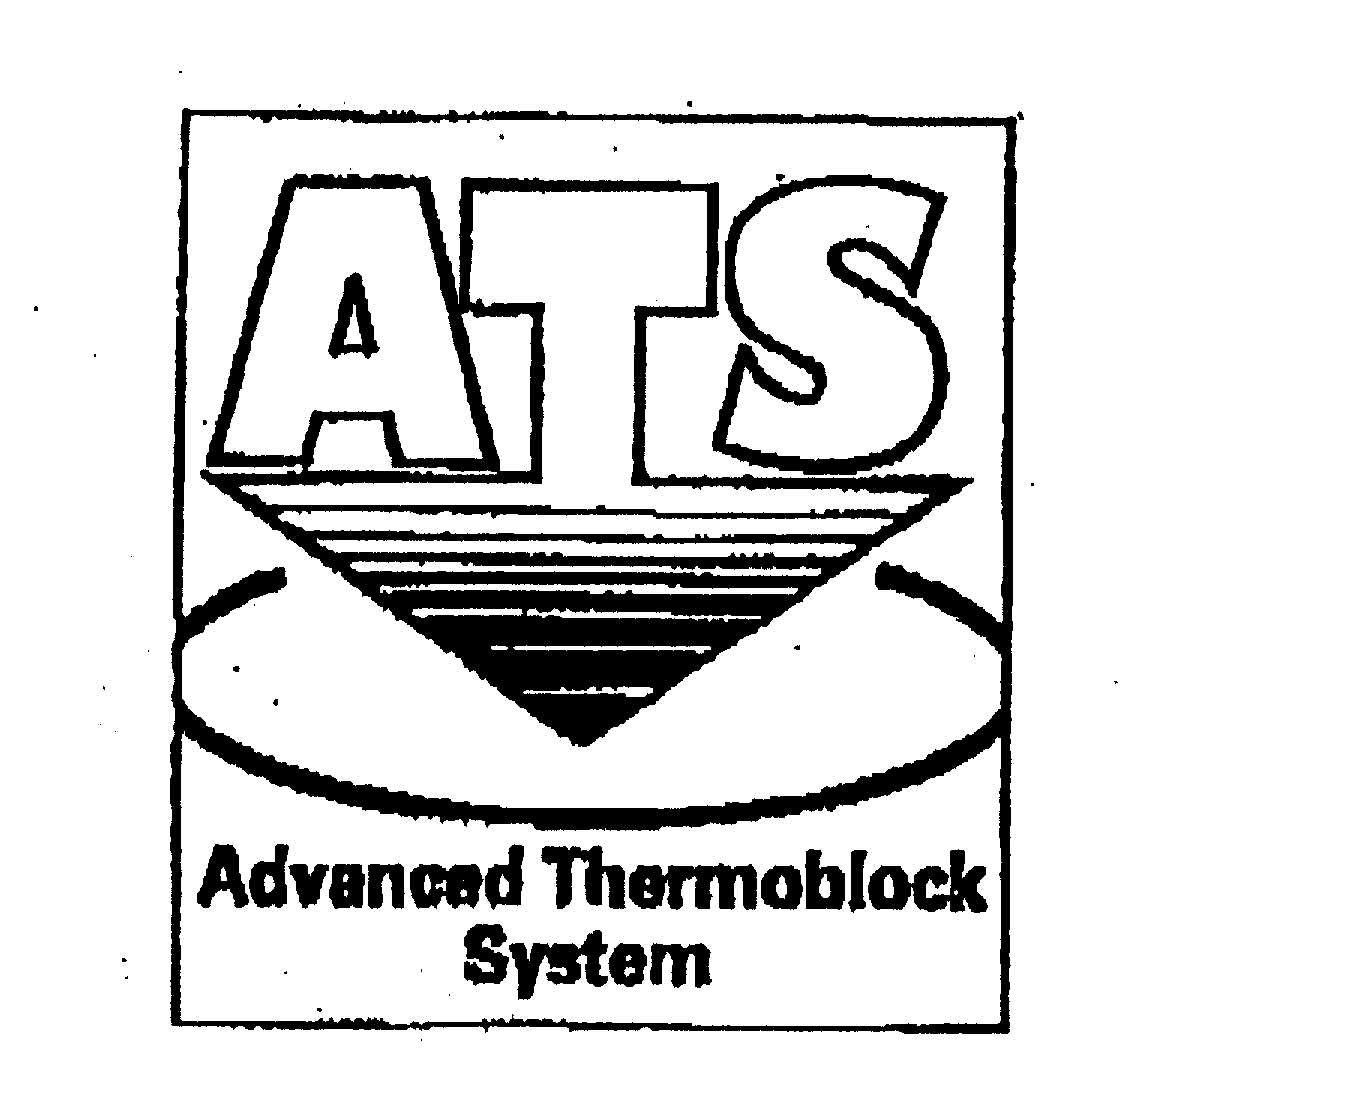  ATS ADVANCED THERMOBLOCK SYSTEM